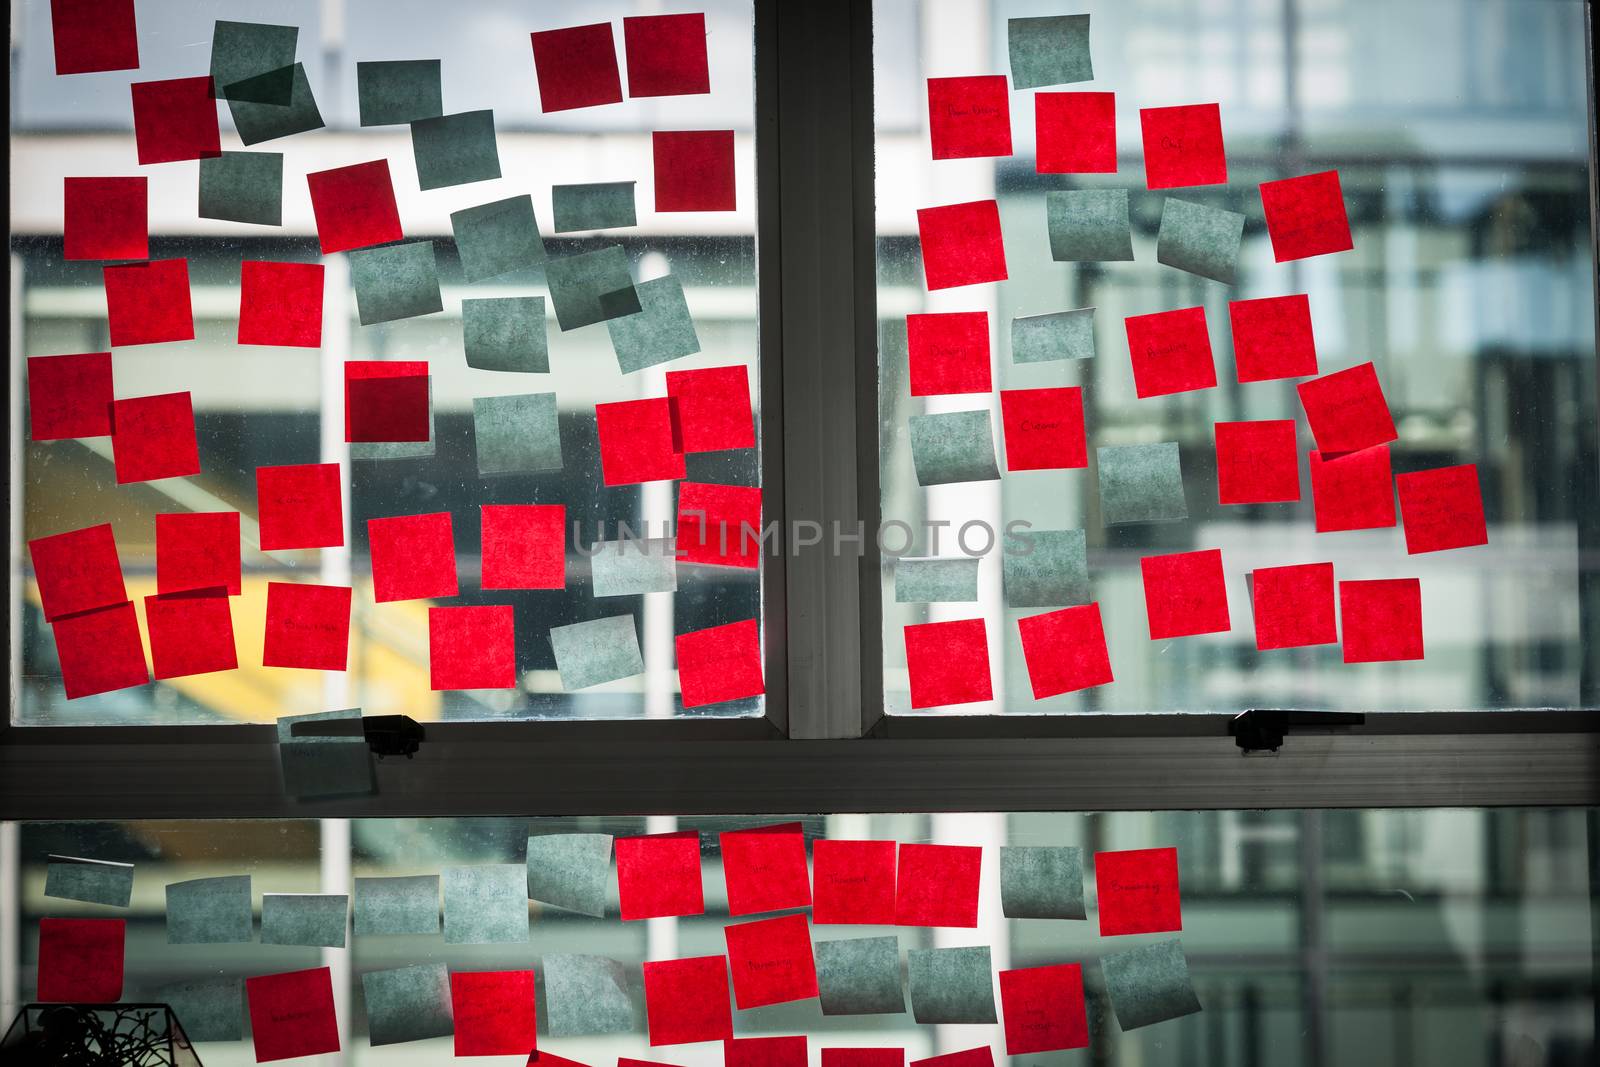 Office window used to ideas board by brians101